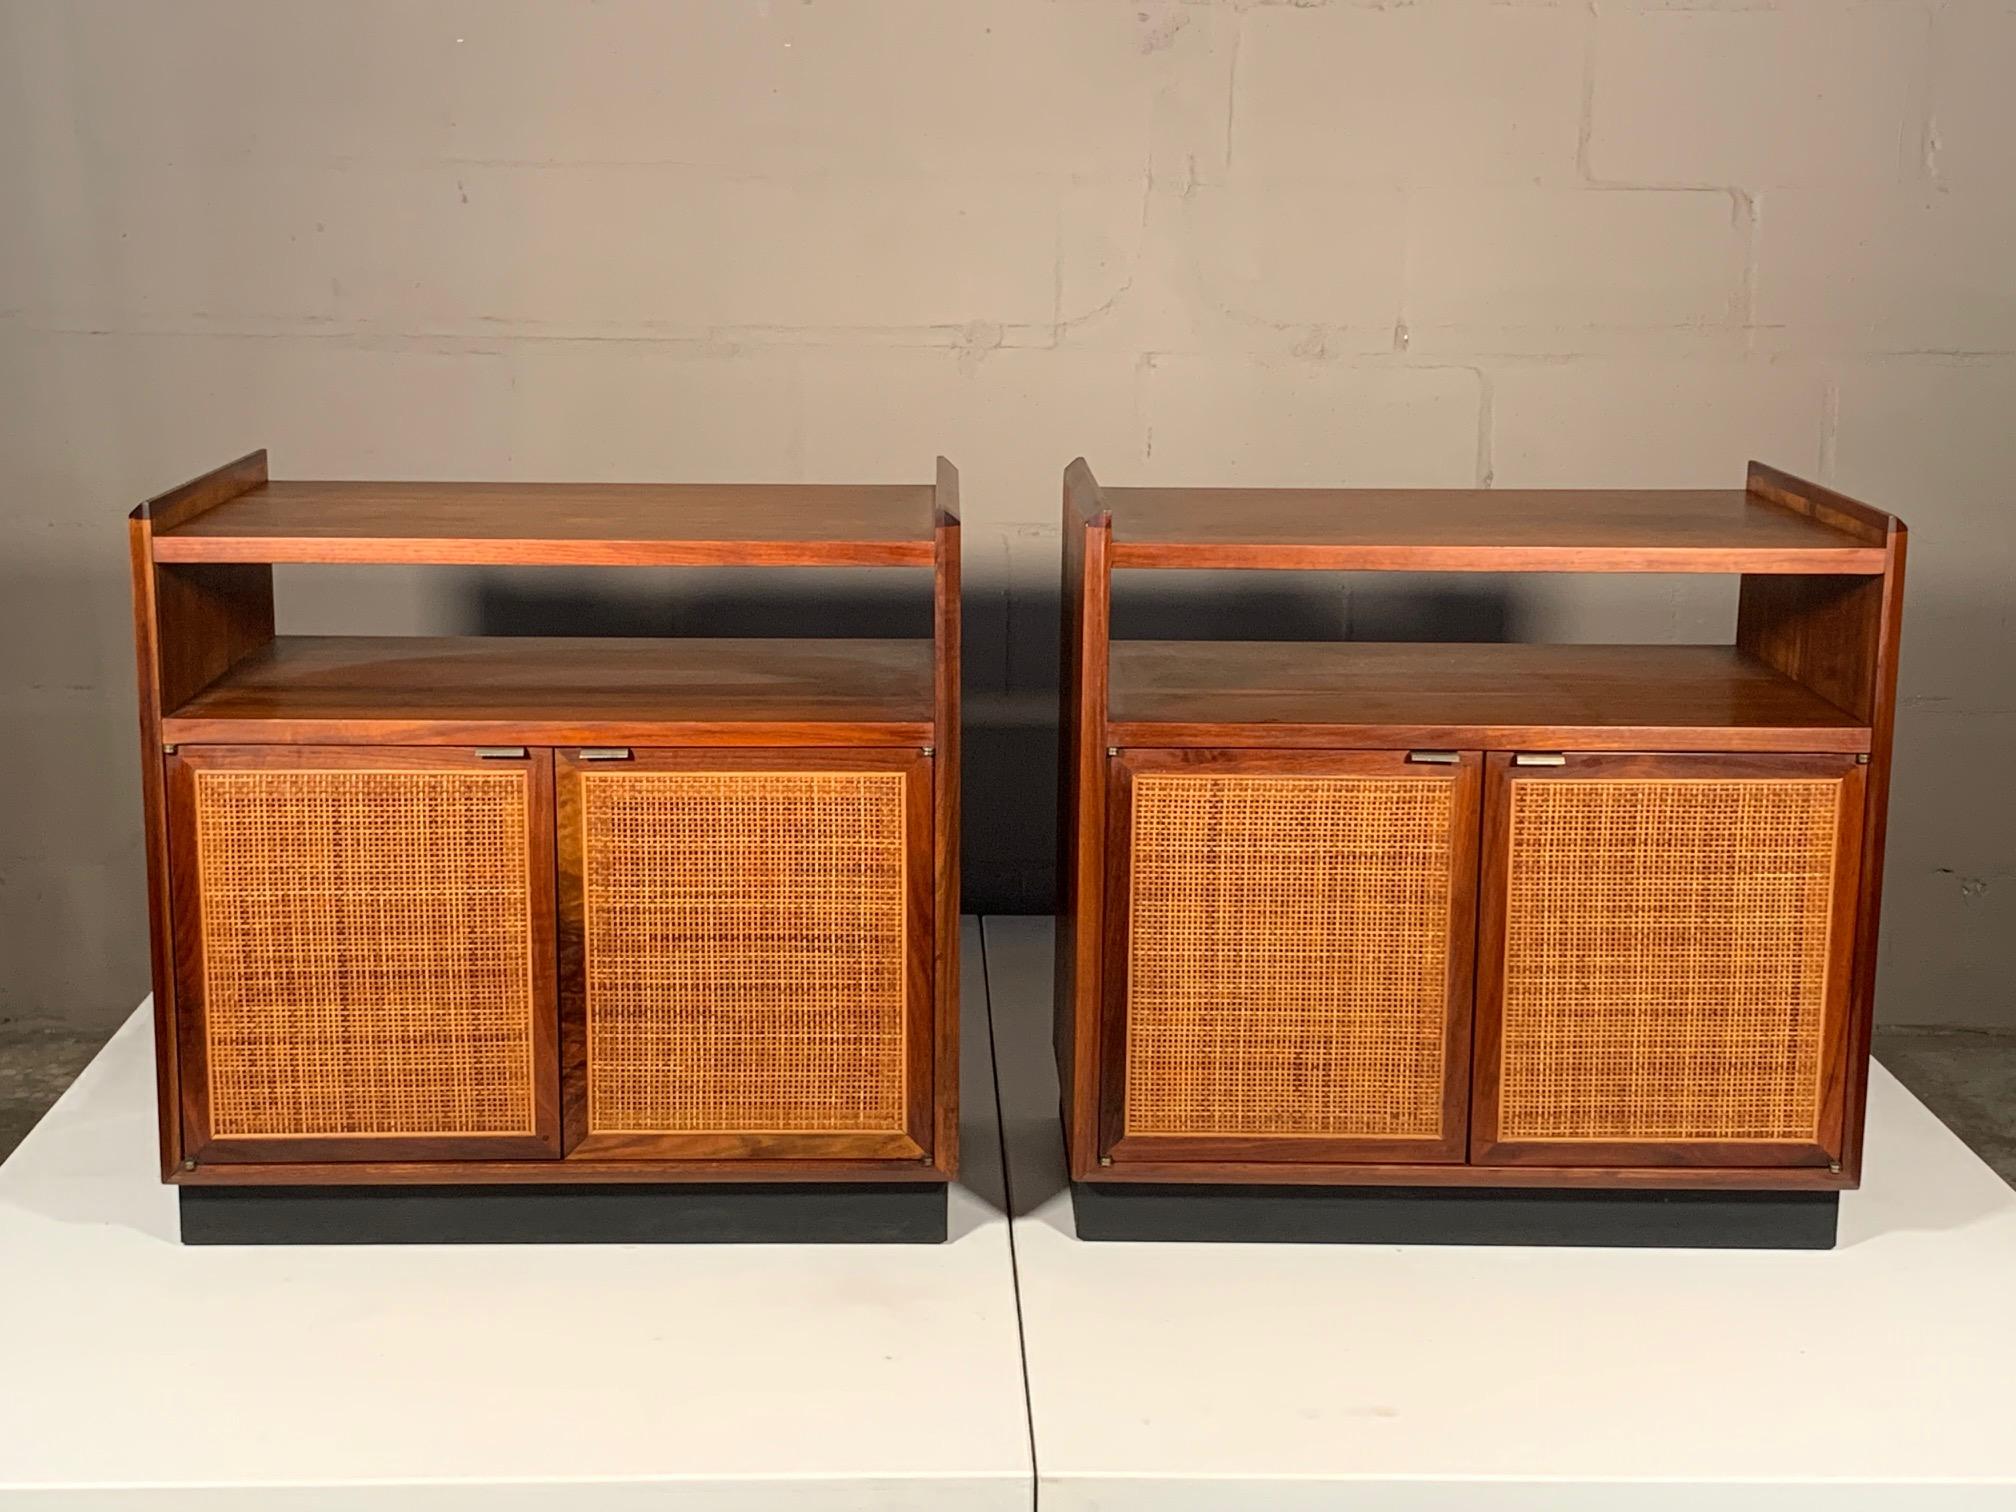 A pair of unusual and multifunctional end tables or nightstands by Jack Cartwright for Founders Furniture. Could also be storage cabinets or small credenzas. Walnut with original caned doors, finished backs and specially designed cutout for storage,